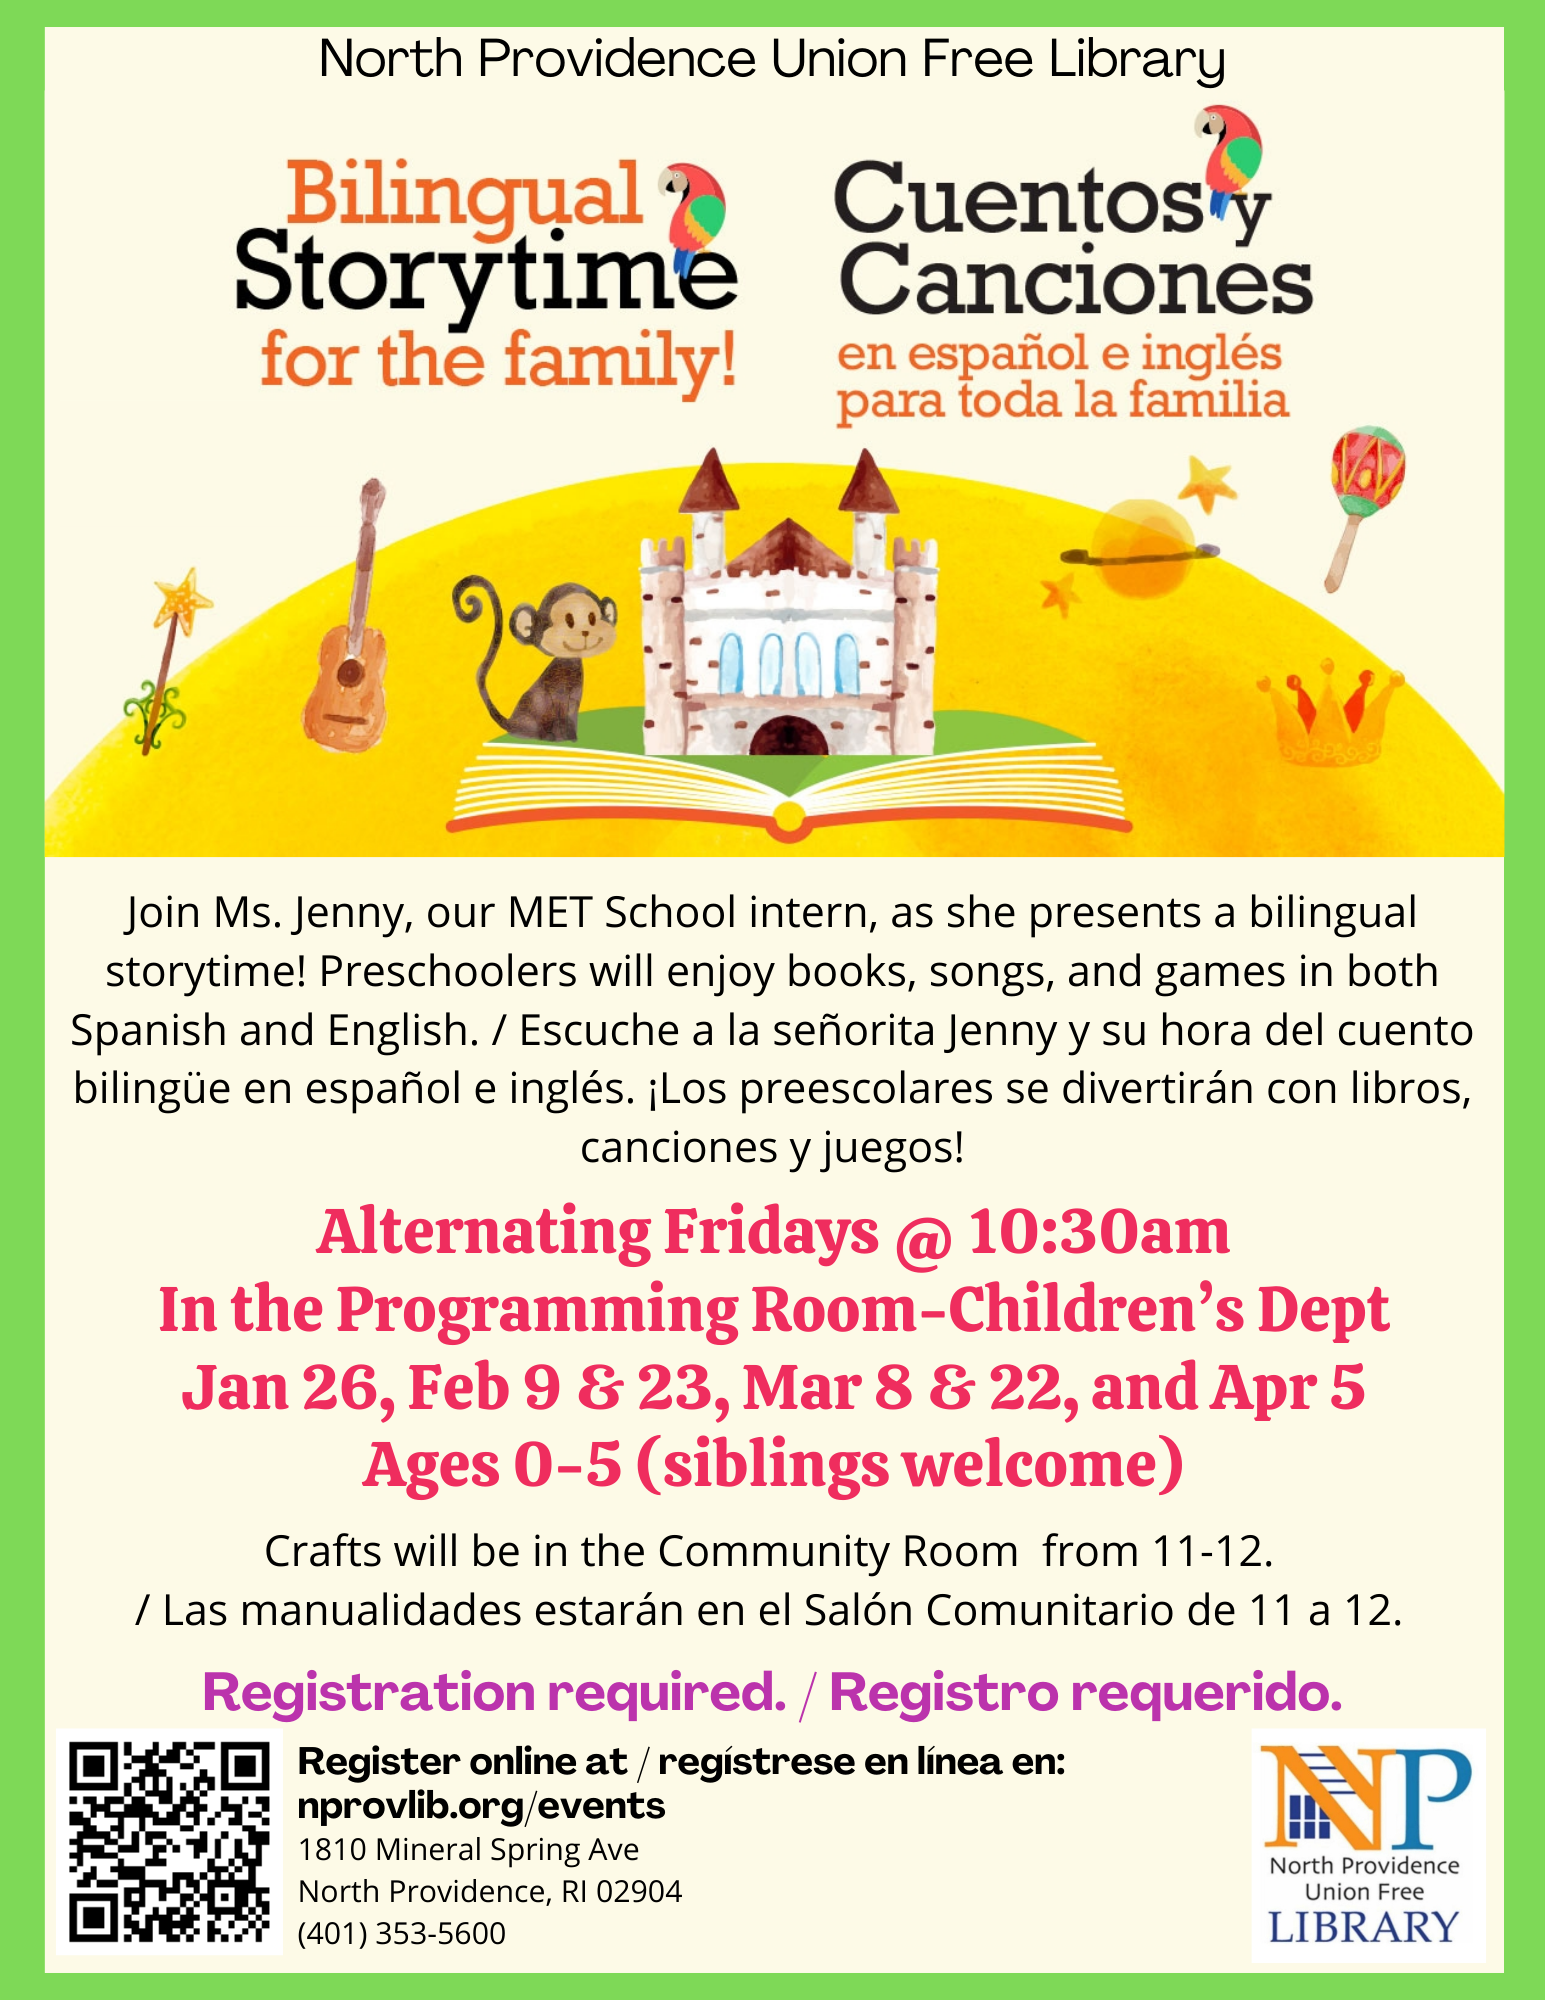 Join Ms. Jenny for a bilingual story time every other Friday beginning on January 26th.